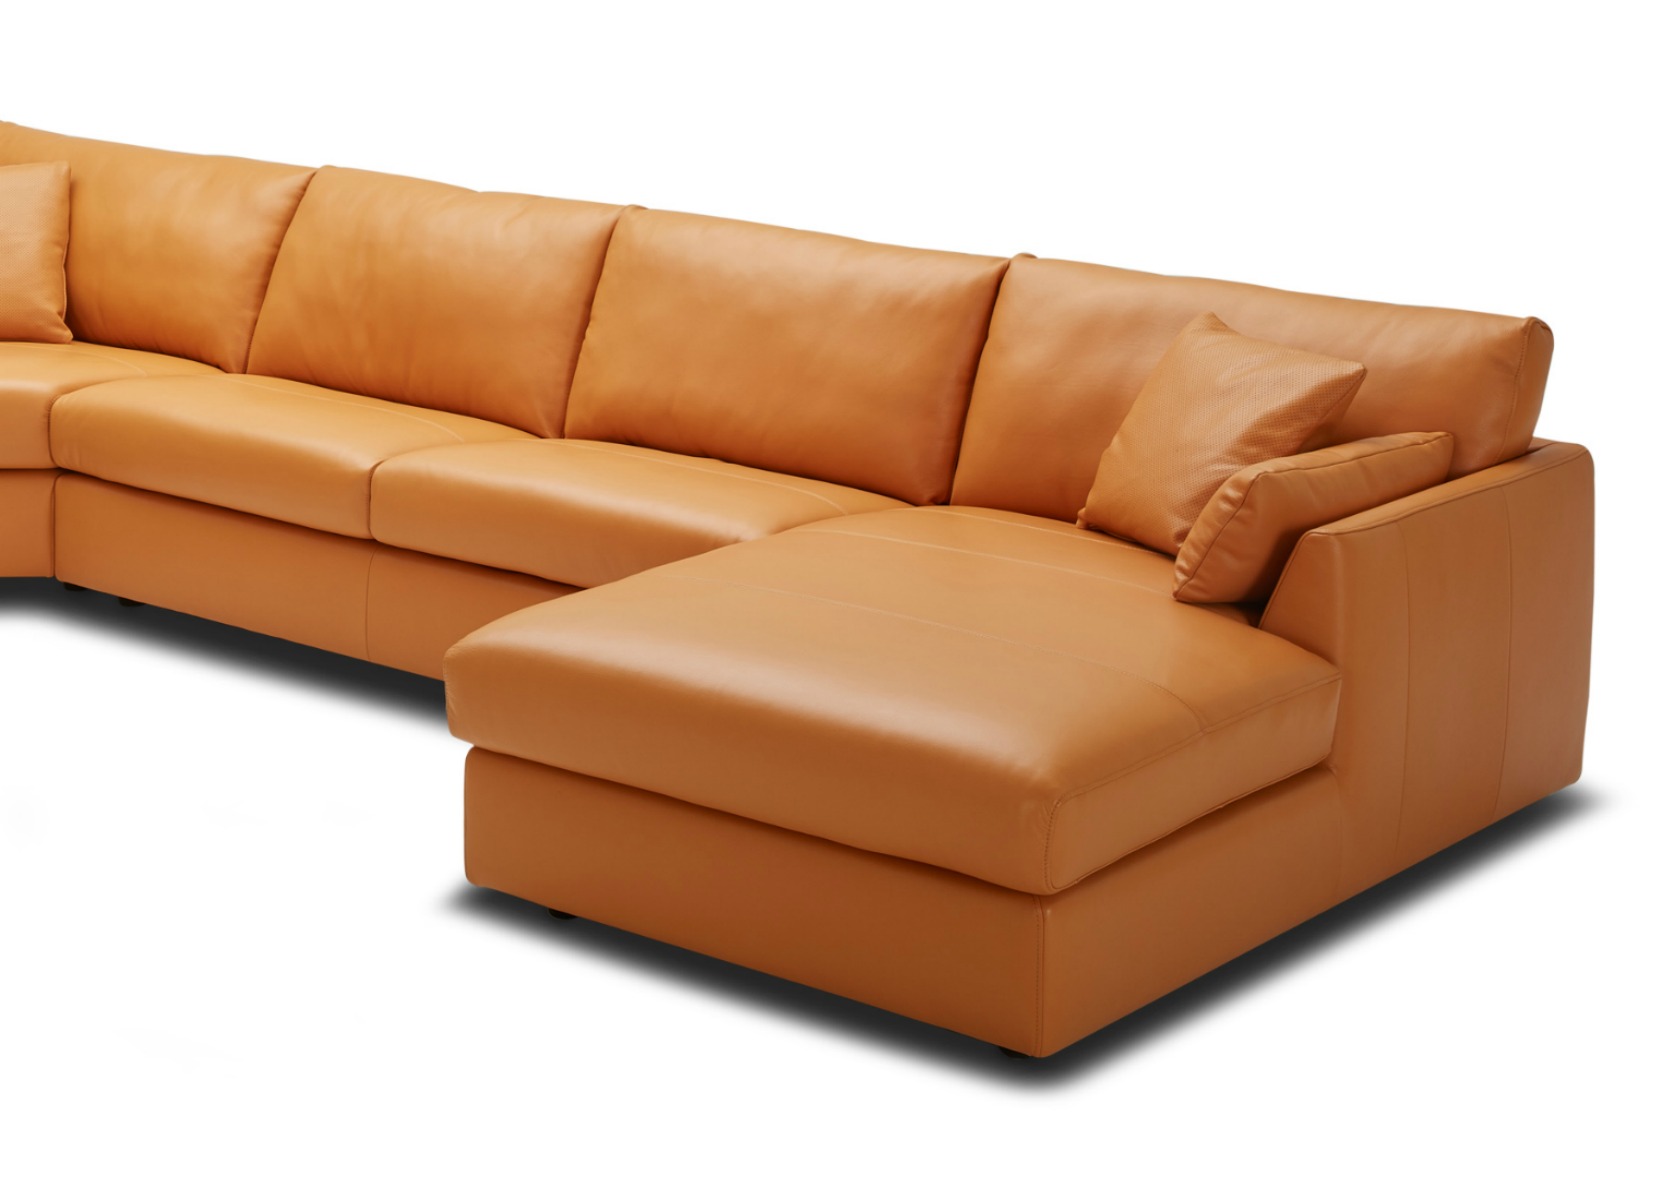 sofa seating leather but not the rest